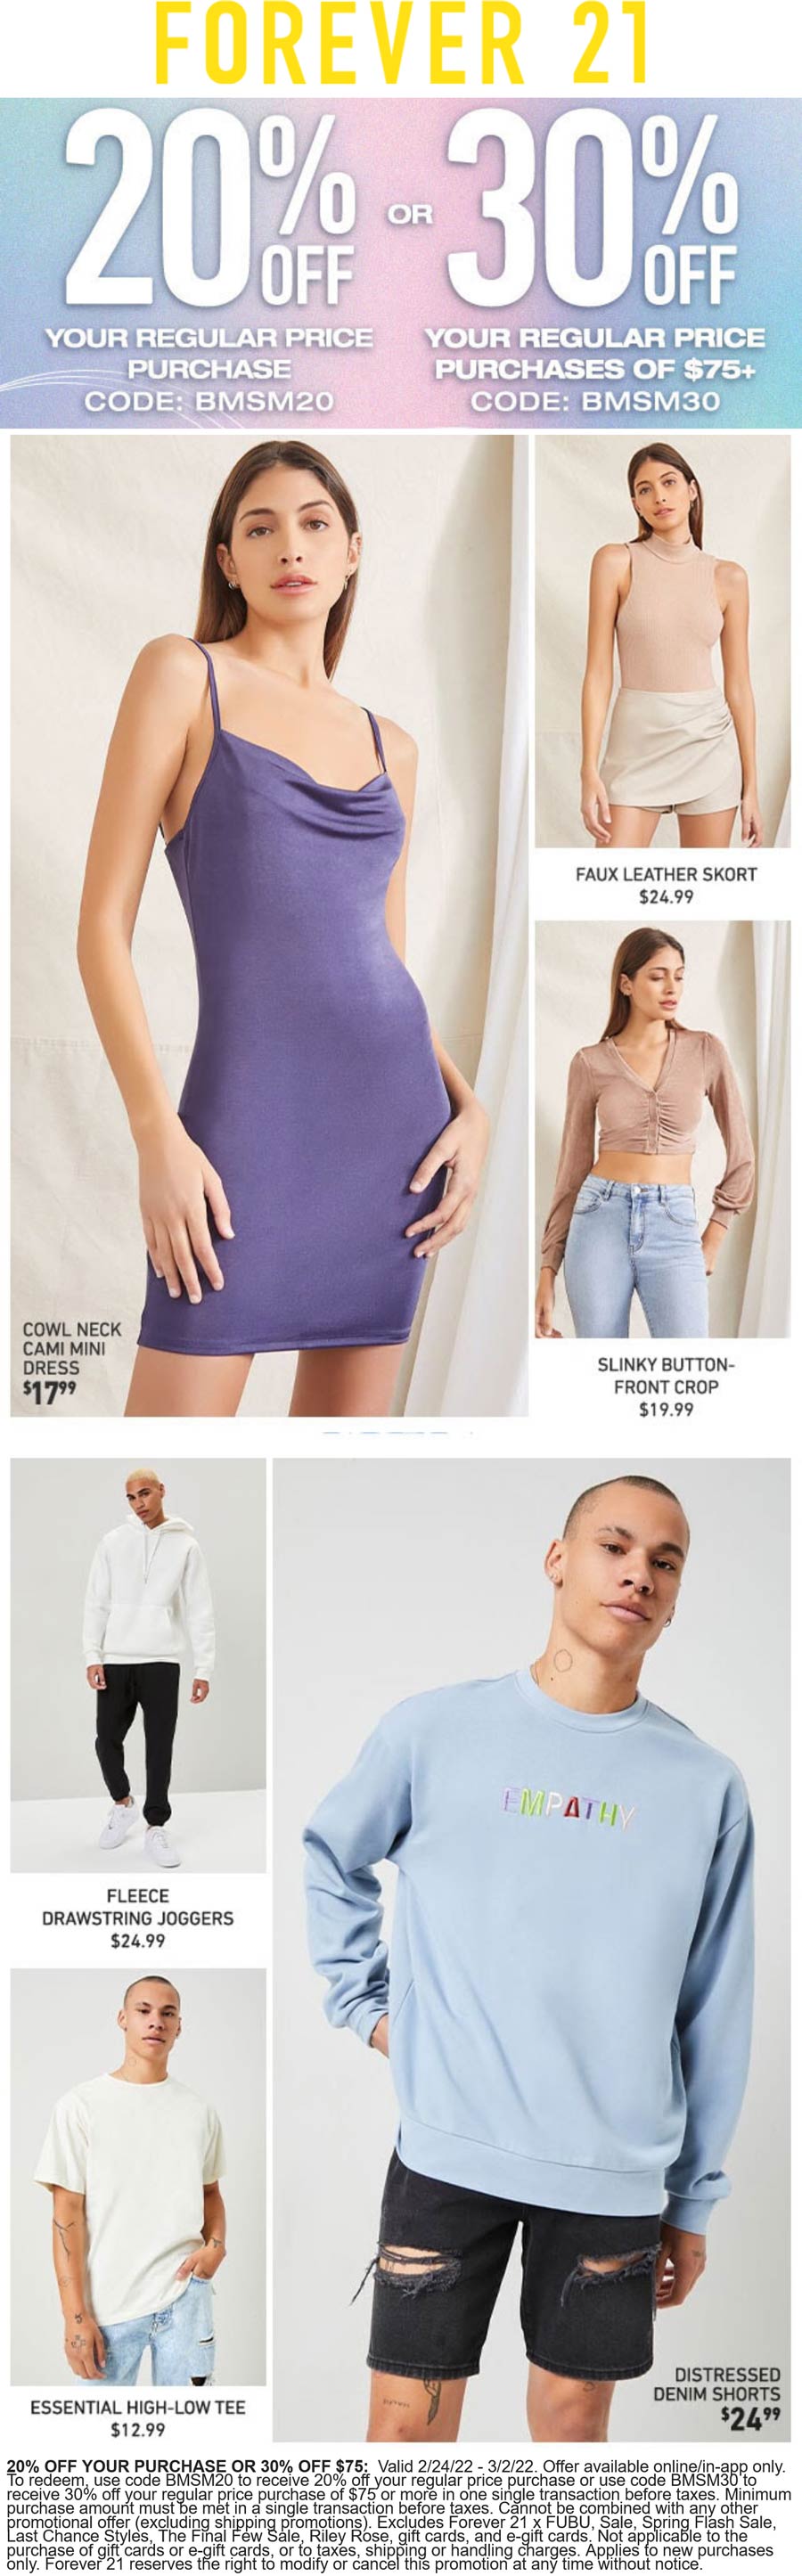 Forever 21 stores Coupon  20-30% off online at Forever 21 via promo code BMSM20 & BMSM30 #forever21 